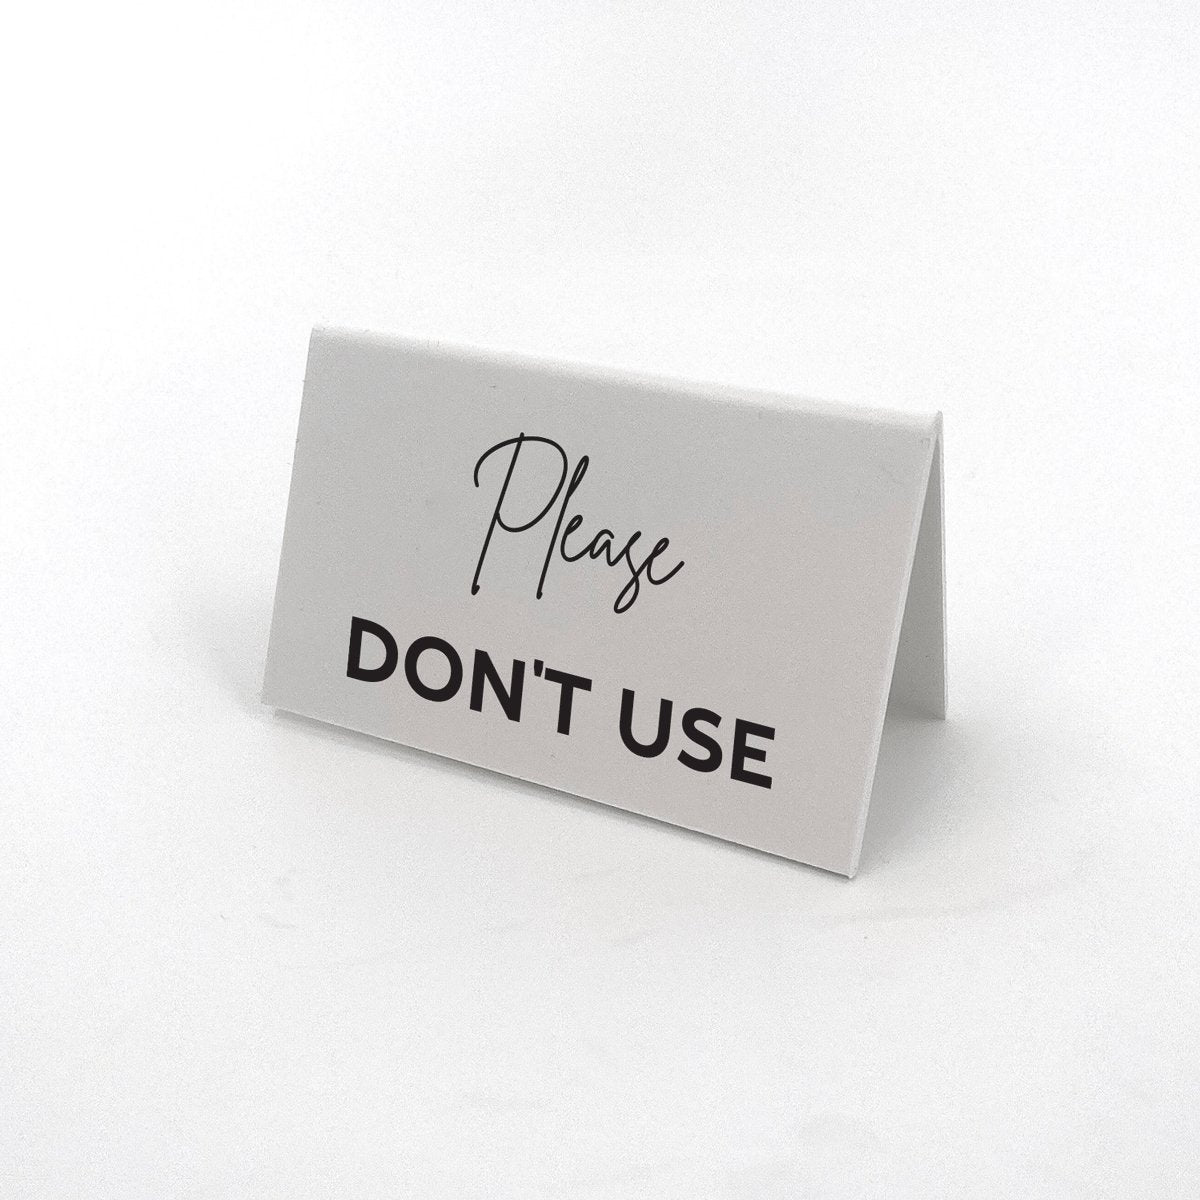 Please Don't Use - White (2x4) - All Things Real Estate